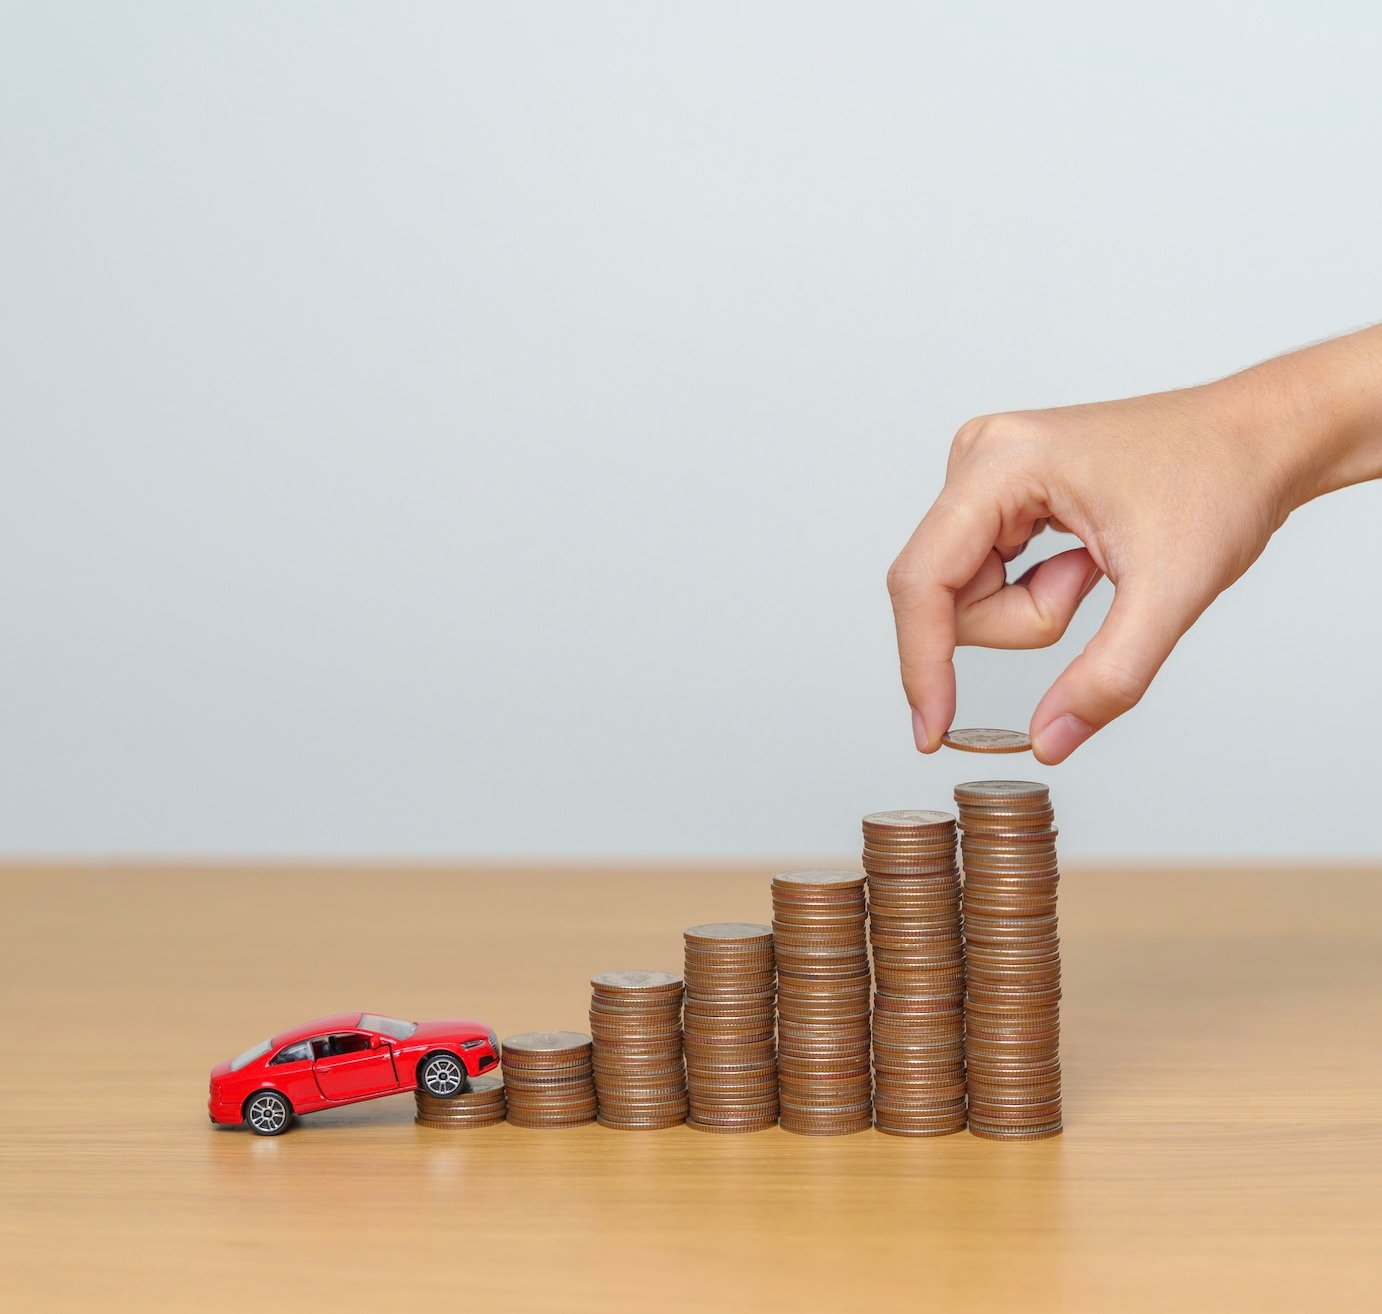 Can't Afford Car Payment? Here Are Your Options in South Africa